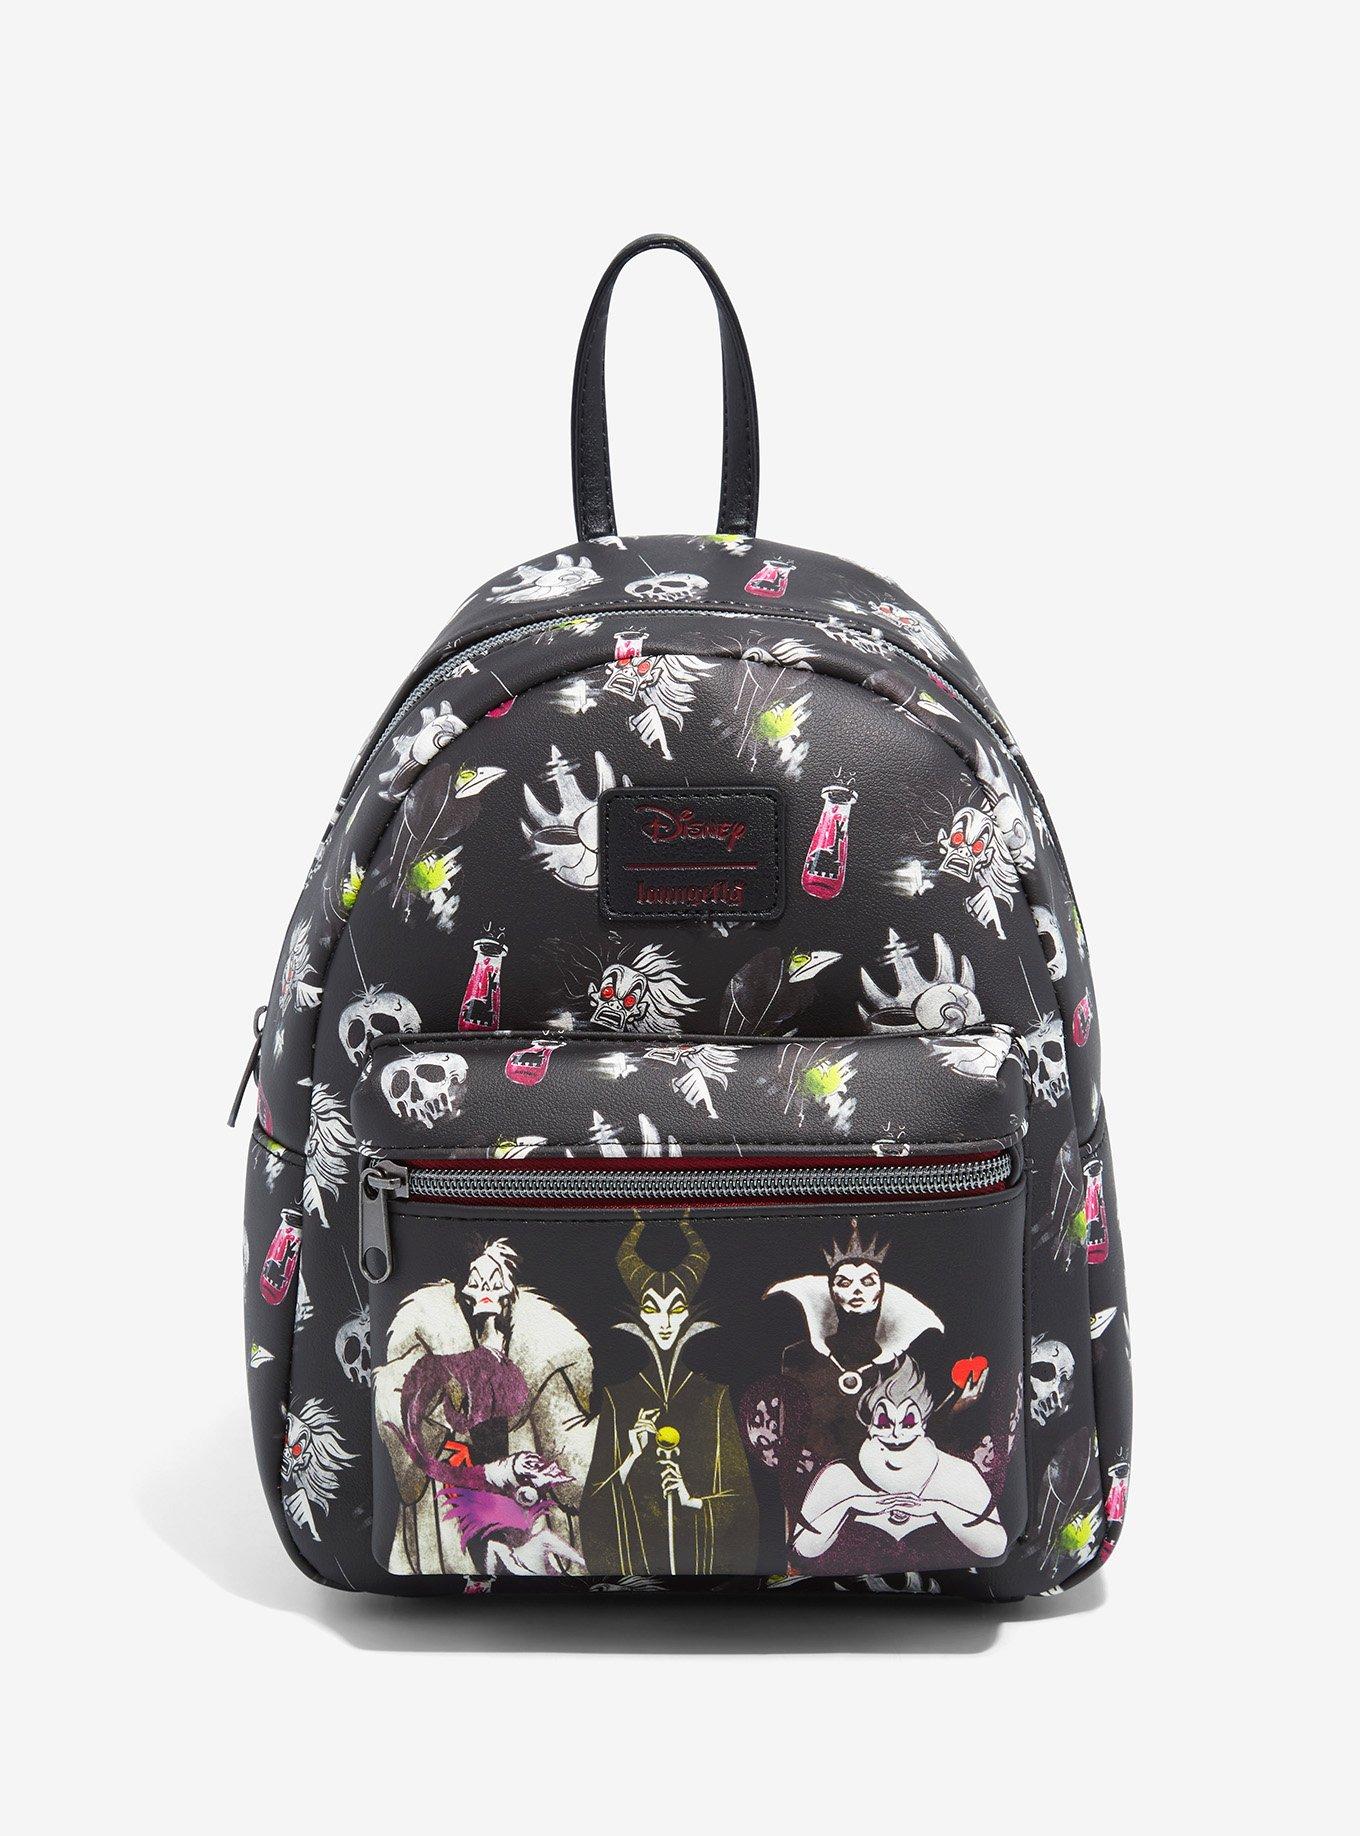 Loungefly Disney Princess Icons Mini Backpack, Hot Topic